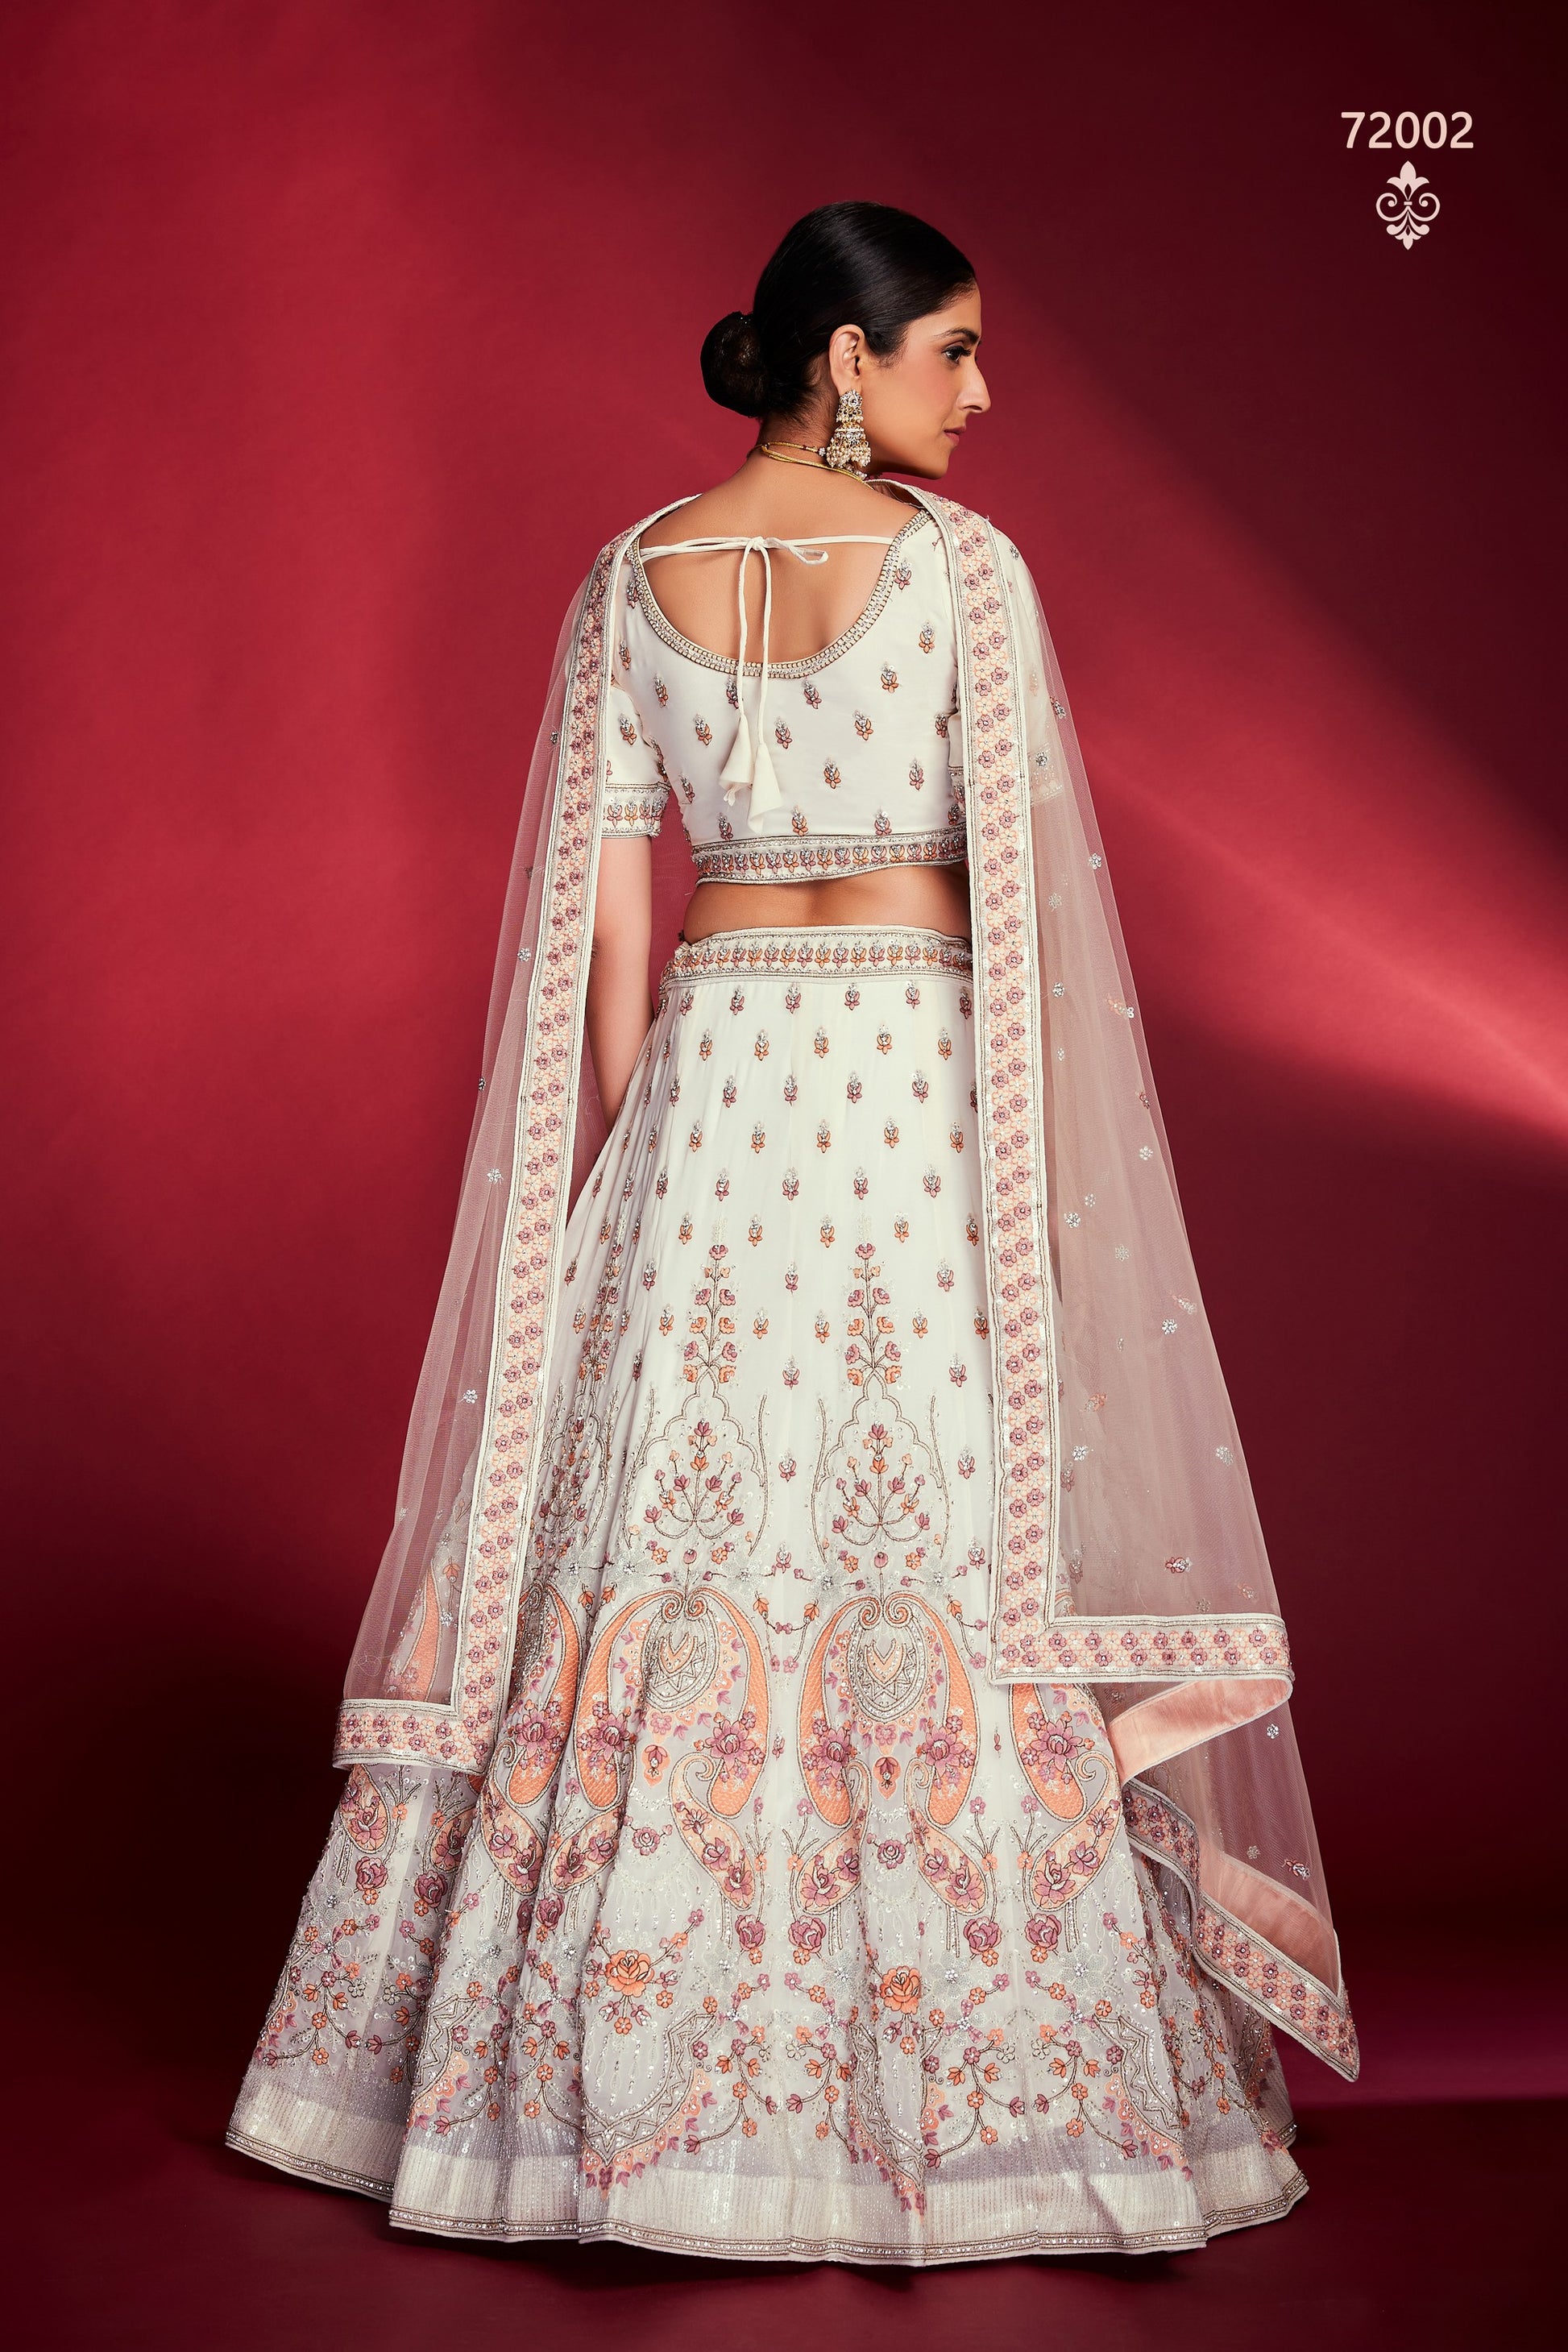 White Pakistani Georgette Lehenga Choli For Indian Festivals & Weddings - Sequence Embroidery Work, Thread Embroidery Work, Zari Work, Zarkan Work